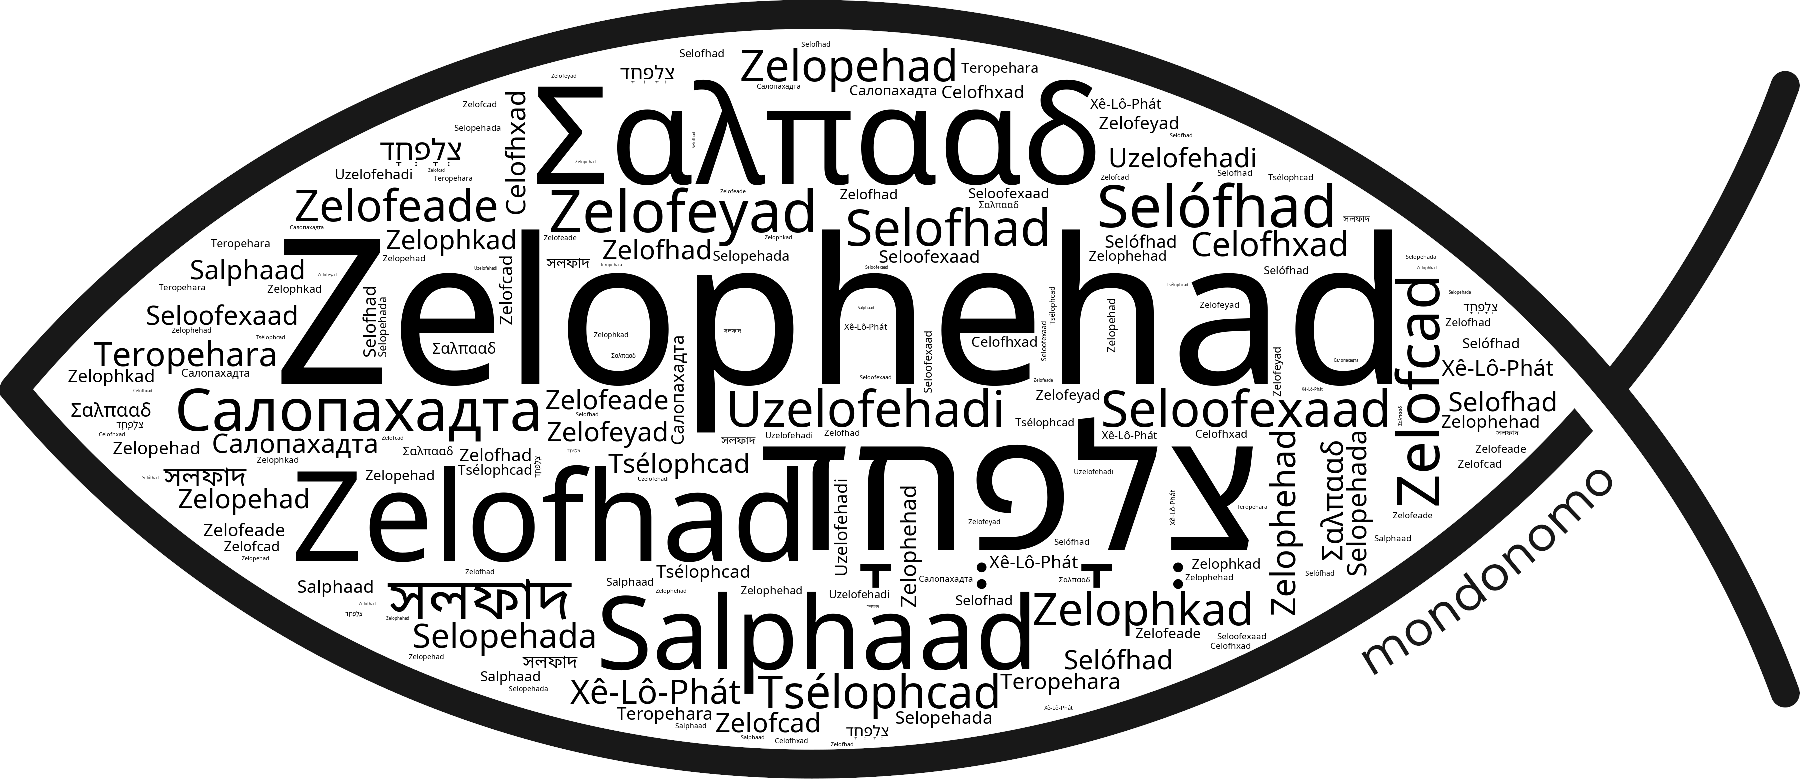 Name Zelophehad in the world's Bibles